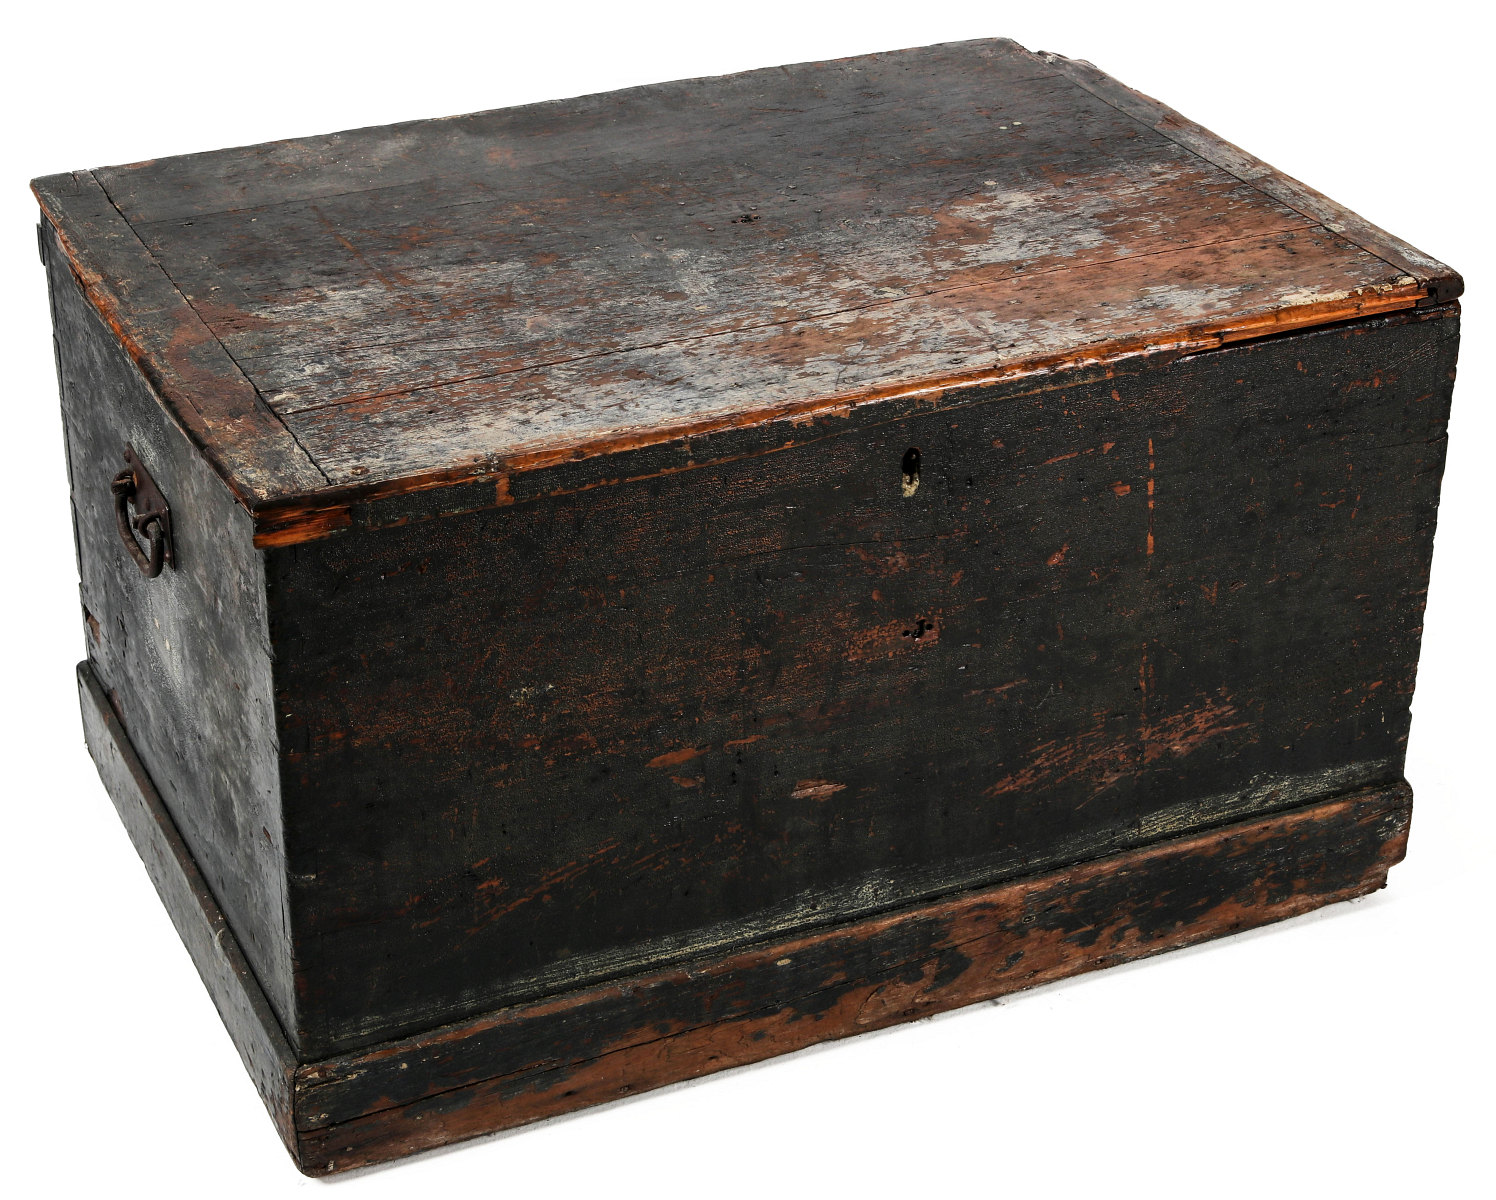 A 19TH CENTURY IMMIGRANT'S CHEST, OLD GREEN PAINT